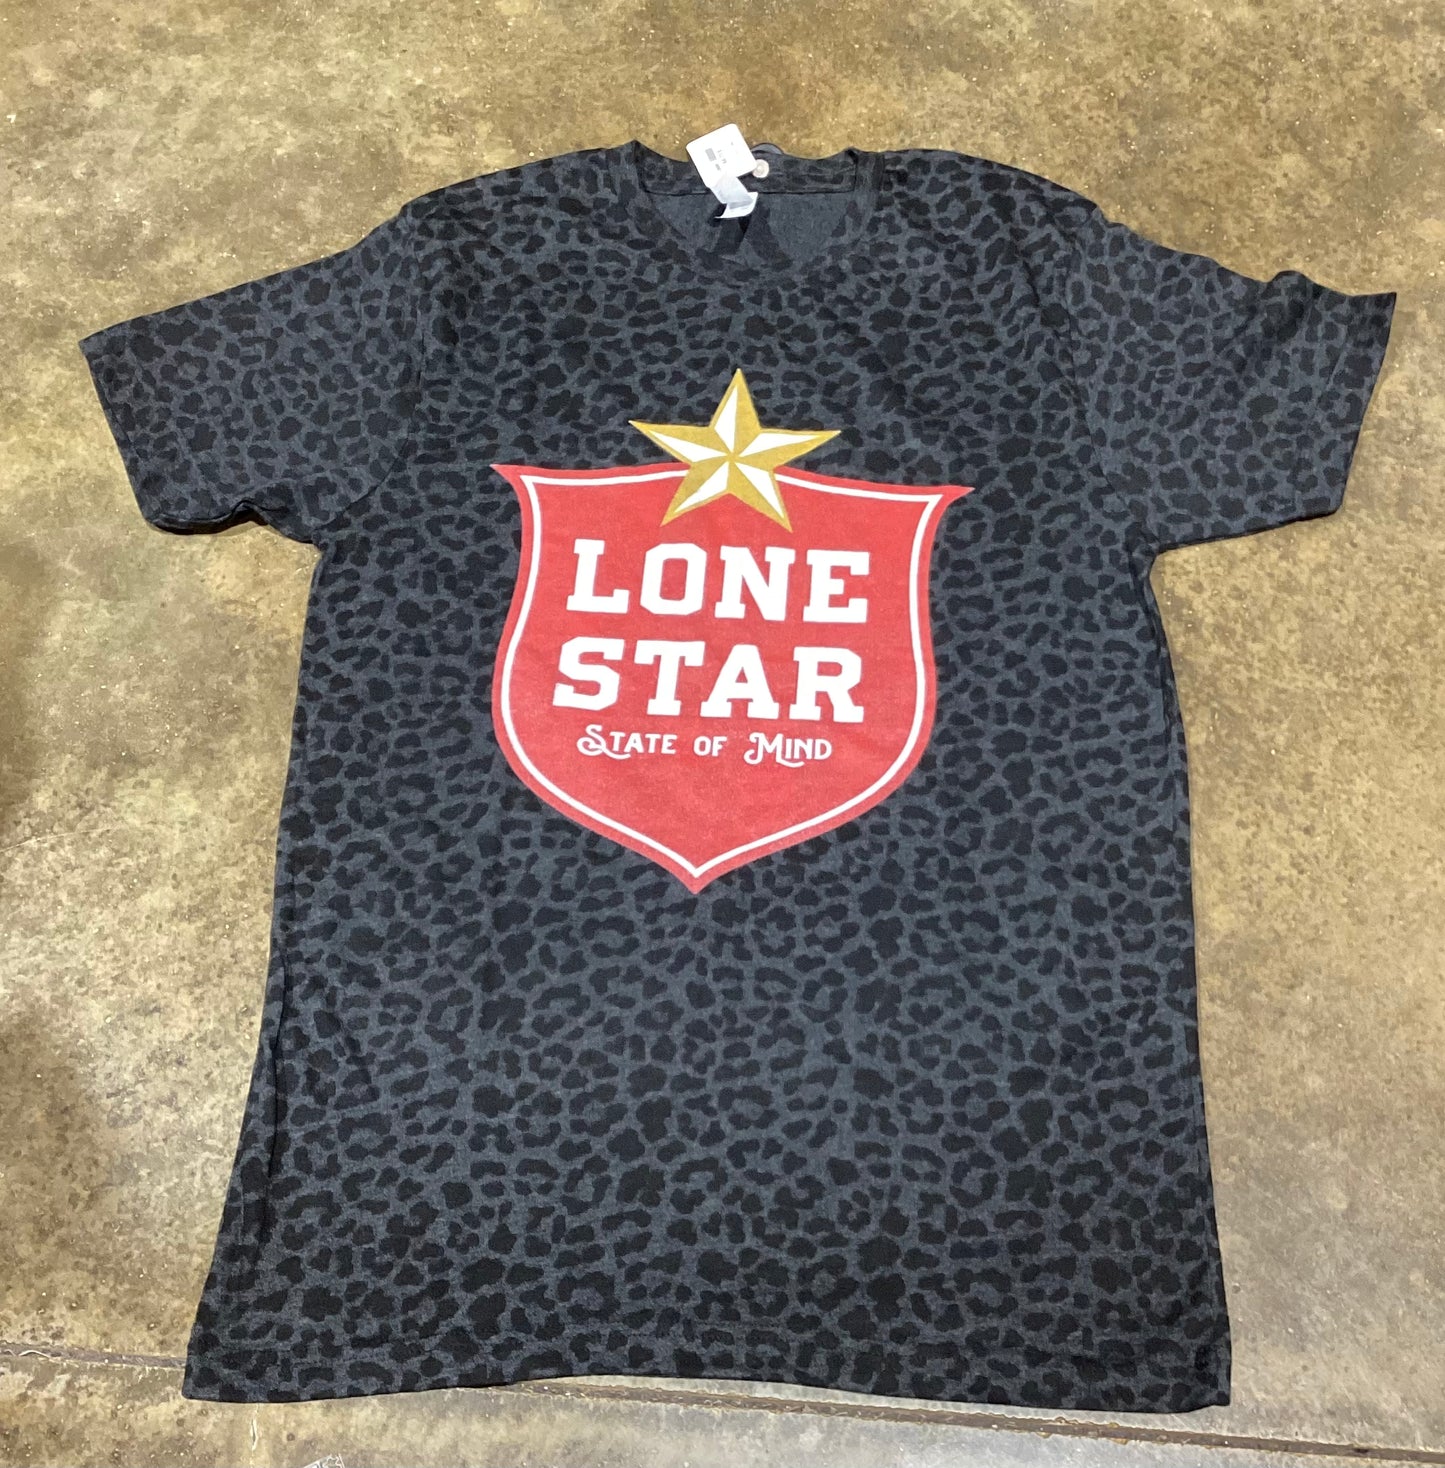 LONE STAR STATE OF MIND TEE SHIRT - LEOPARD